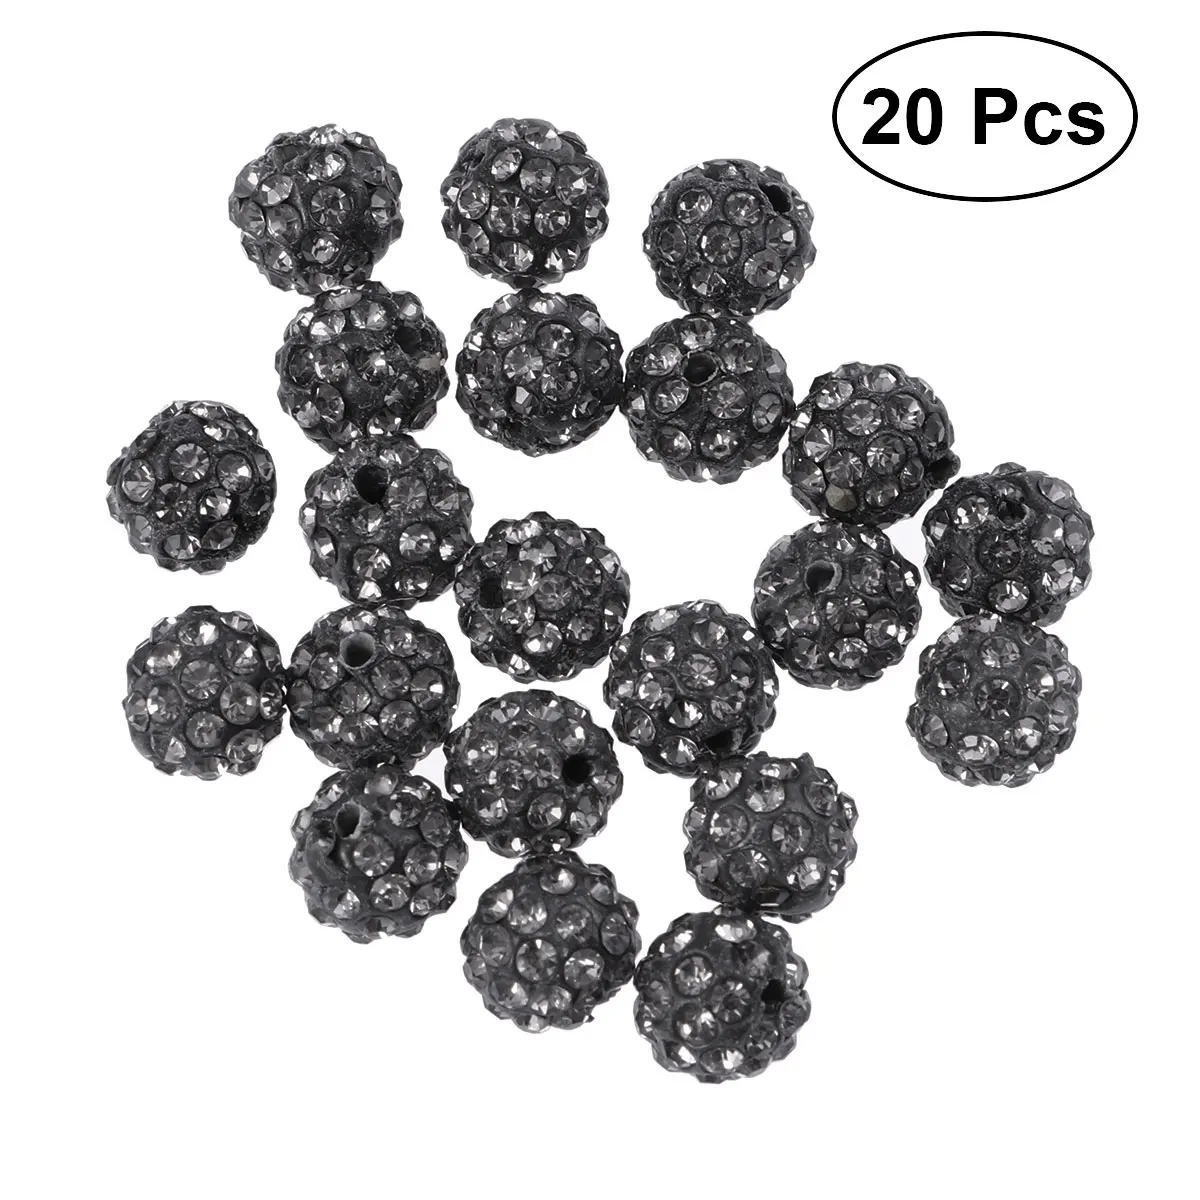 

20PCS Drilling Balls Czech Soft Ceramics Round Holes DIY Crystal Clay Jewelry Spacer Beads Disco Balls